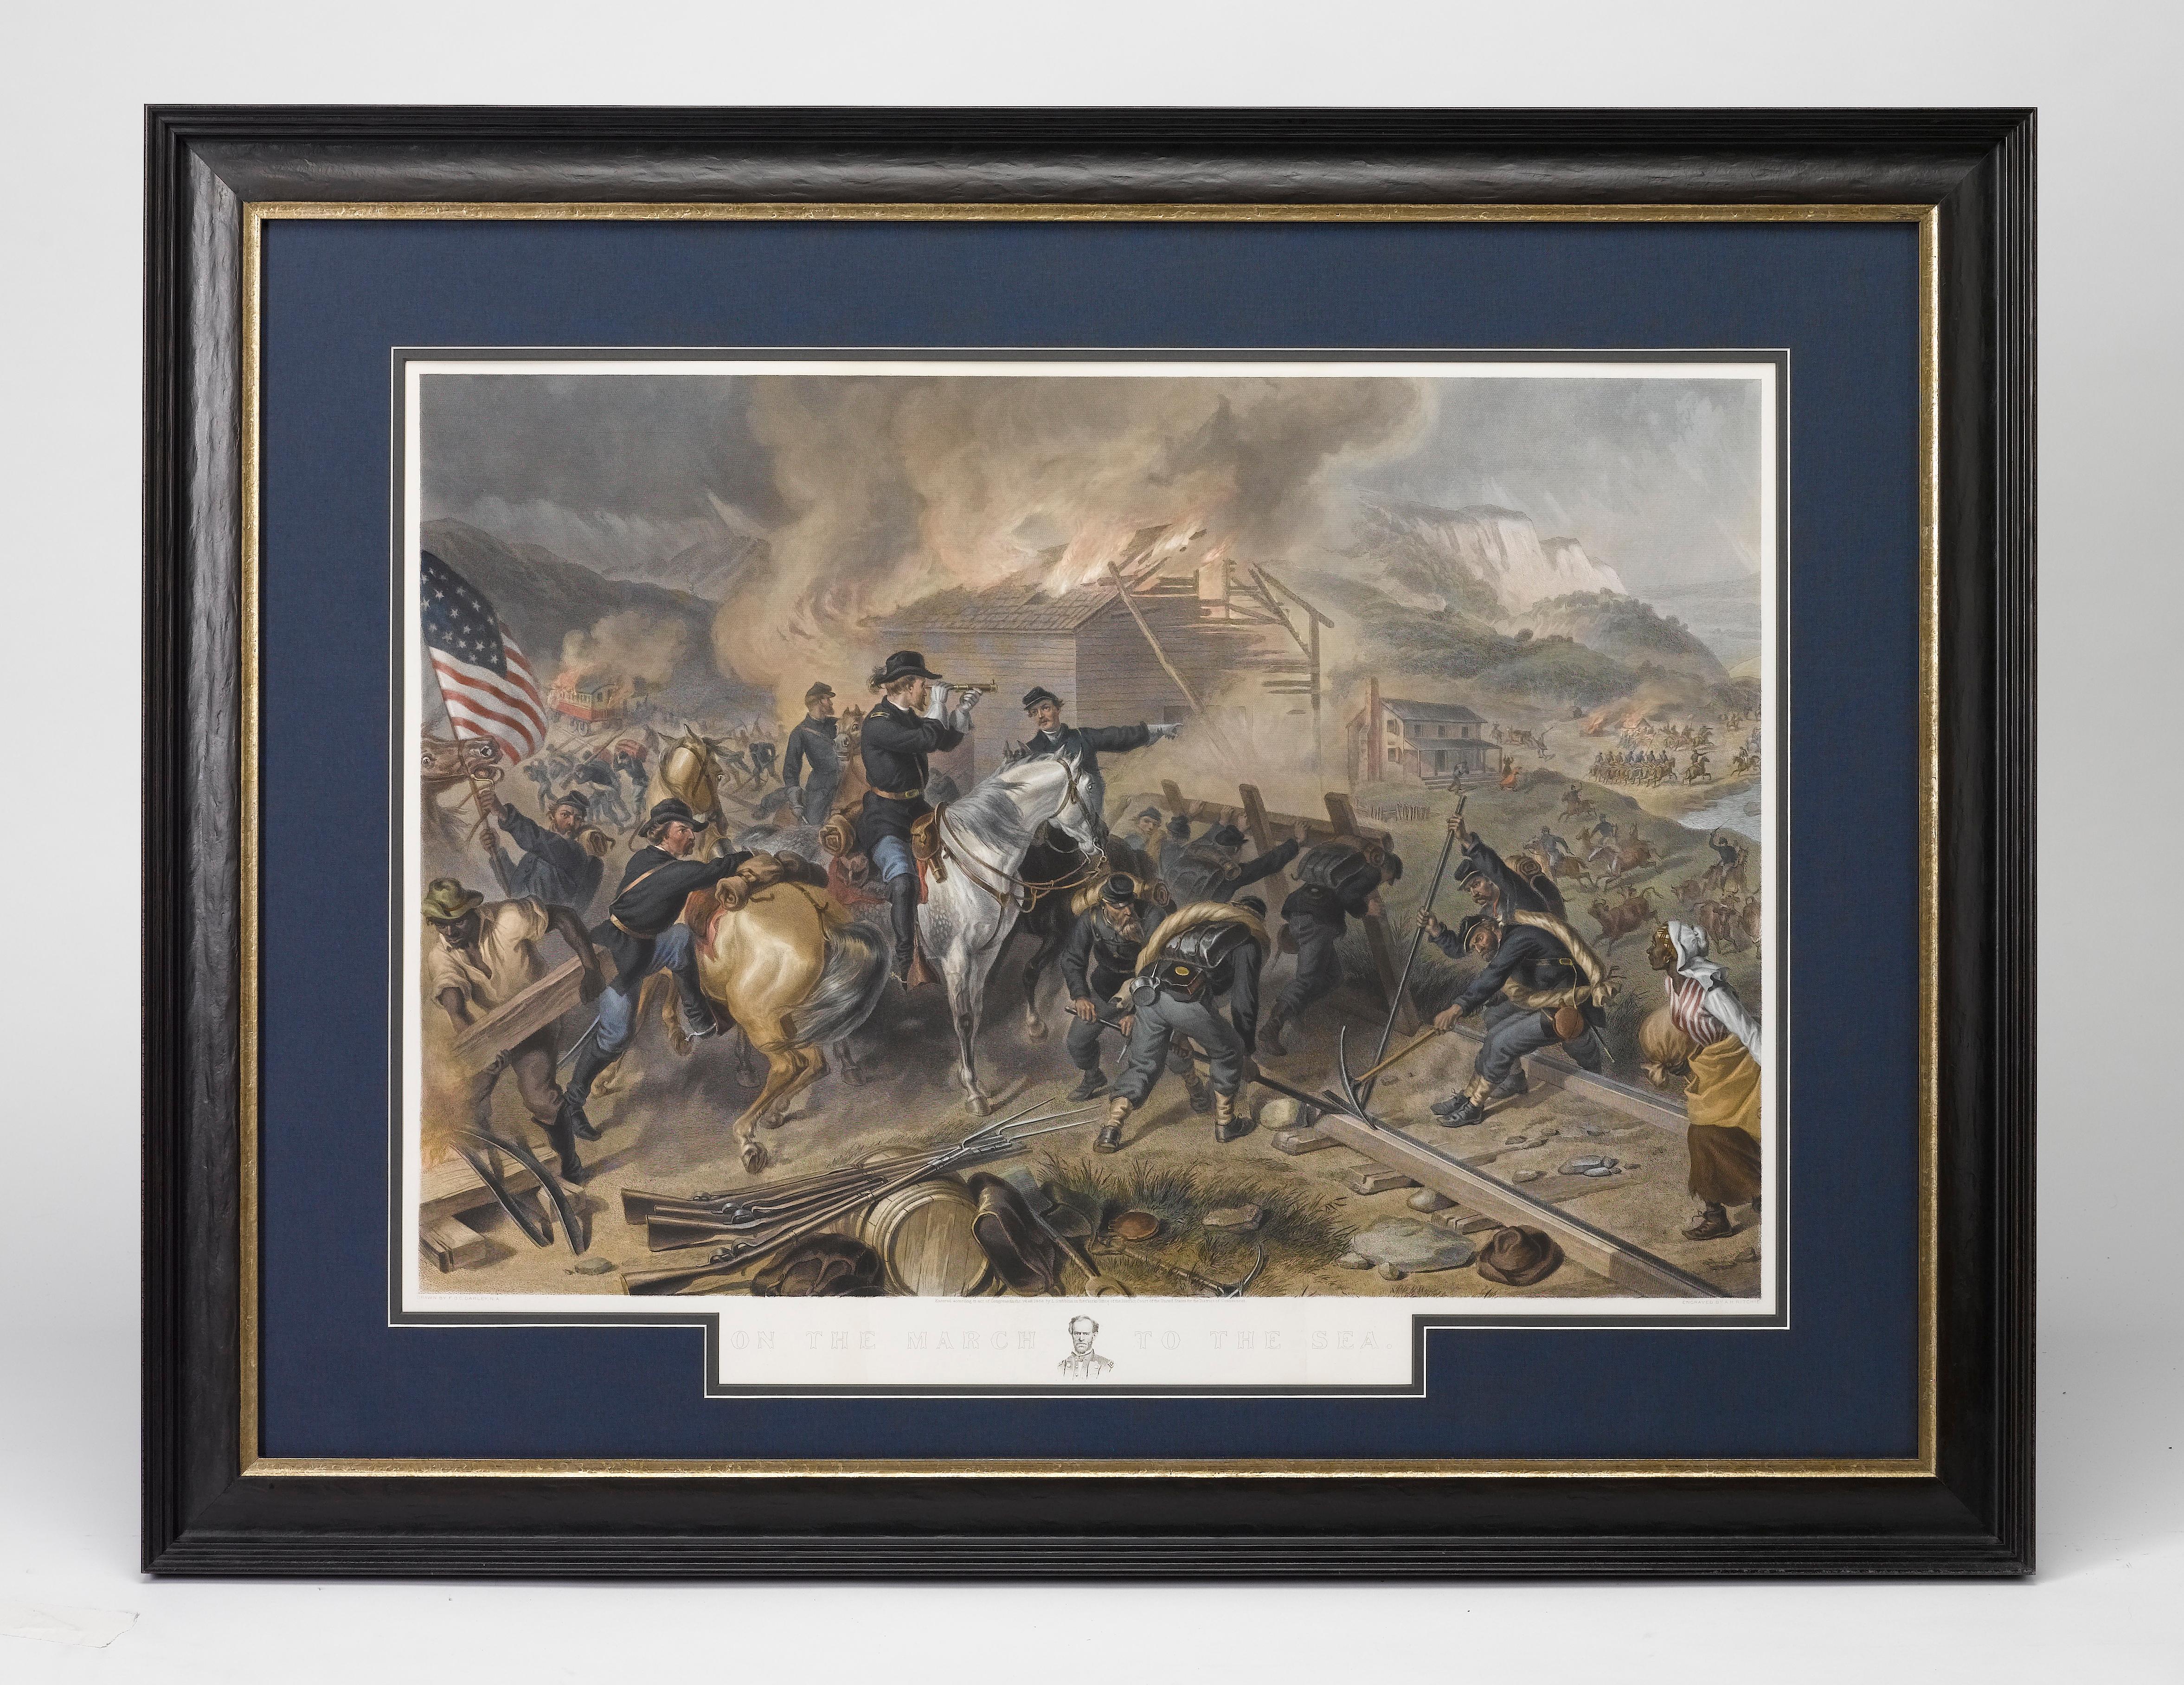 This color print of On The March to the Sea by Felix O.C. Darley, and engraved by A.H. Ritchie, is a stunning portrayal of William T. Sherman’s notorious Georgia Campaign. Originally published in 1868 by L. Stebbins in Hartford, Connecticut, this